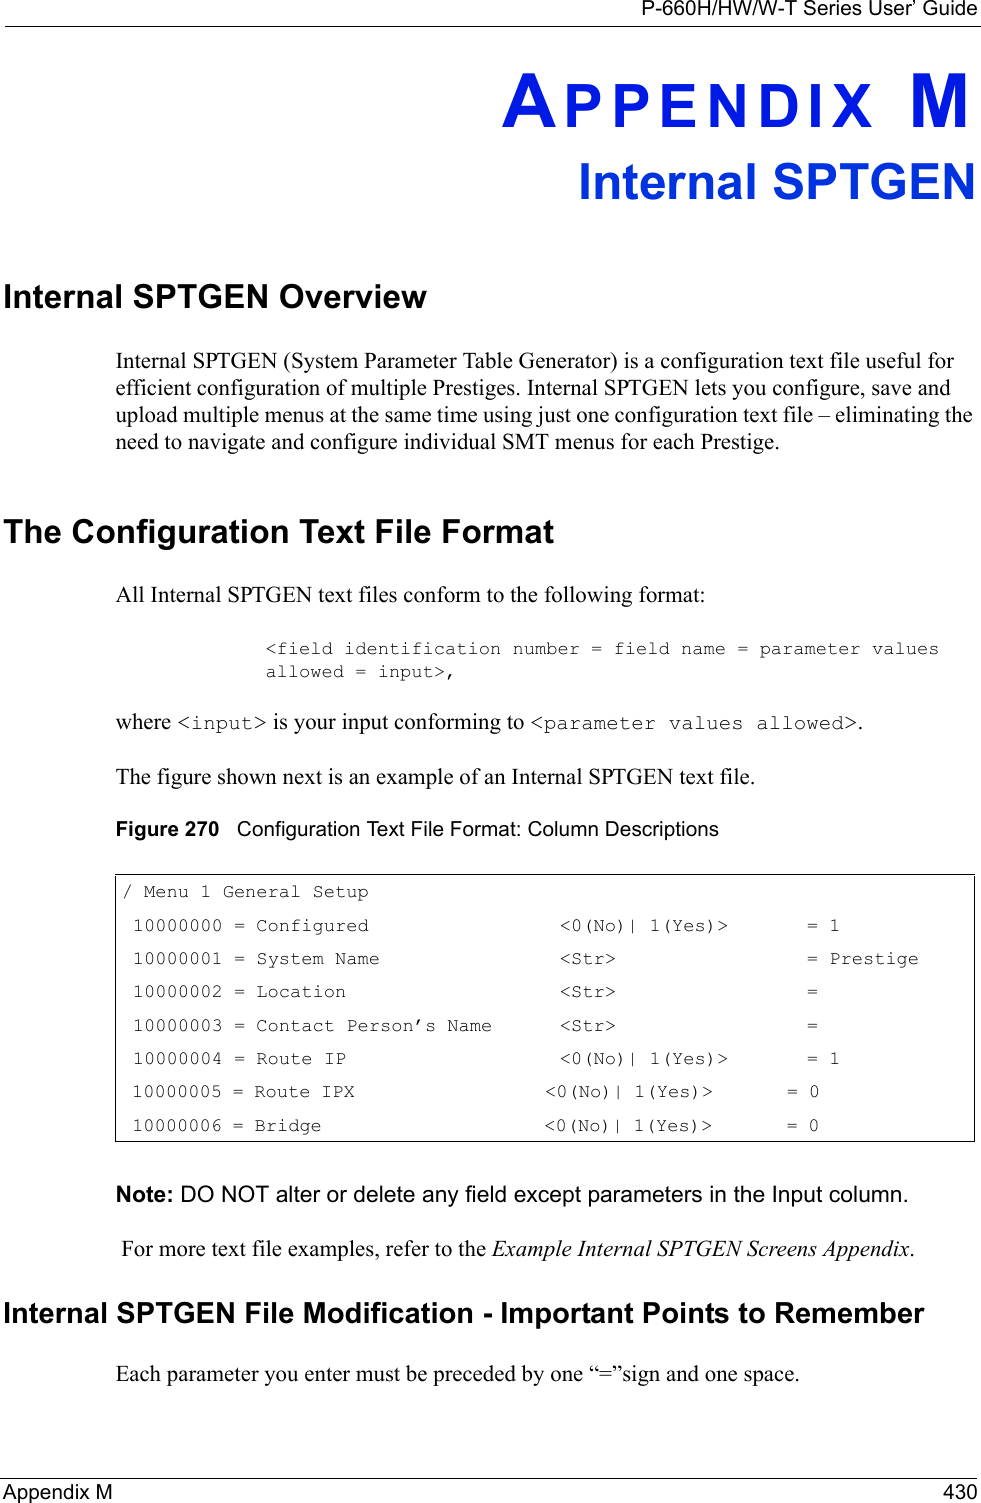 P-660H/HW/W-T Series User’ GuideAppendix M 430APPENDIX MInternal SPTGENInternal SPTGEN OverviewInternal SPTGEN (System Parameter Table Generator) is a configuration text file useful for efficient configuration of multiple Prestiges. Internal SPTGEN lets you configure, save and upload multiple menus at the same time using just one configuration text file – eliminating the need to navigate and configure individual SMT menus for each Prestige. The Configuration Text File FormatAll Internal SPTGEN text files conform to the following format:&lt;field identification number = field name = parameter values allowed = input&gt;,where &lt;input&gt; is your input conforming to &lt;parameter values allowed&gt;. The figure shown next is an example of an Internal SPTGEN text file.Figure 270   Configuration Text File Format: Column DescriptionsNote: DO NOT alter or delete any field except parameters in the Input column.  For more text file examples, refer to the Example Internal SPTGEN Screens Appendix.Internal SPTGEN File Modification - Important Points to RememberEach parameter you enter must be preceded by one “=”sign and one space./ Menu 1 General Setup     10000000 = Configured                 &lt;0(No)| 1(Yes)&gt;       = 1     10000001 = System Name                &lt;Str&gt;                 = Prestige 10000002 = Location                   &lt;Str&gt;                 =      10000003 = Contact Person’s Name      &lt;Str&gt;                 =      10000004 = Route IP                   &lt;0(No)| 1(Yes)&gt;       = 1     10000005 = Route IPX                  &lt;0(No)| 1(Yes)&gt;       = 0               10000006 = Bridge                     &lt;0(No)| 1(Yes)&gt;       = 0              